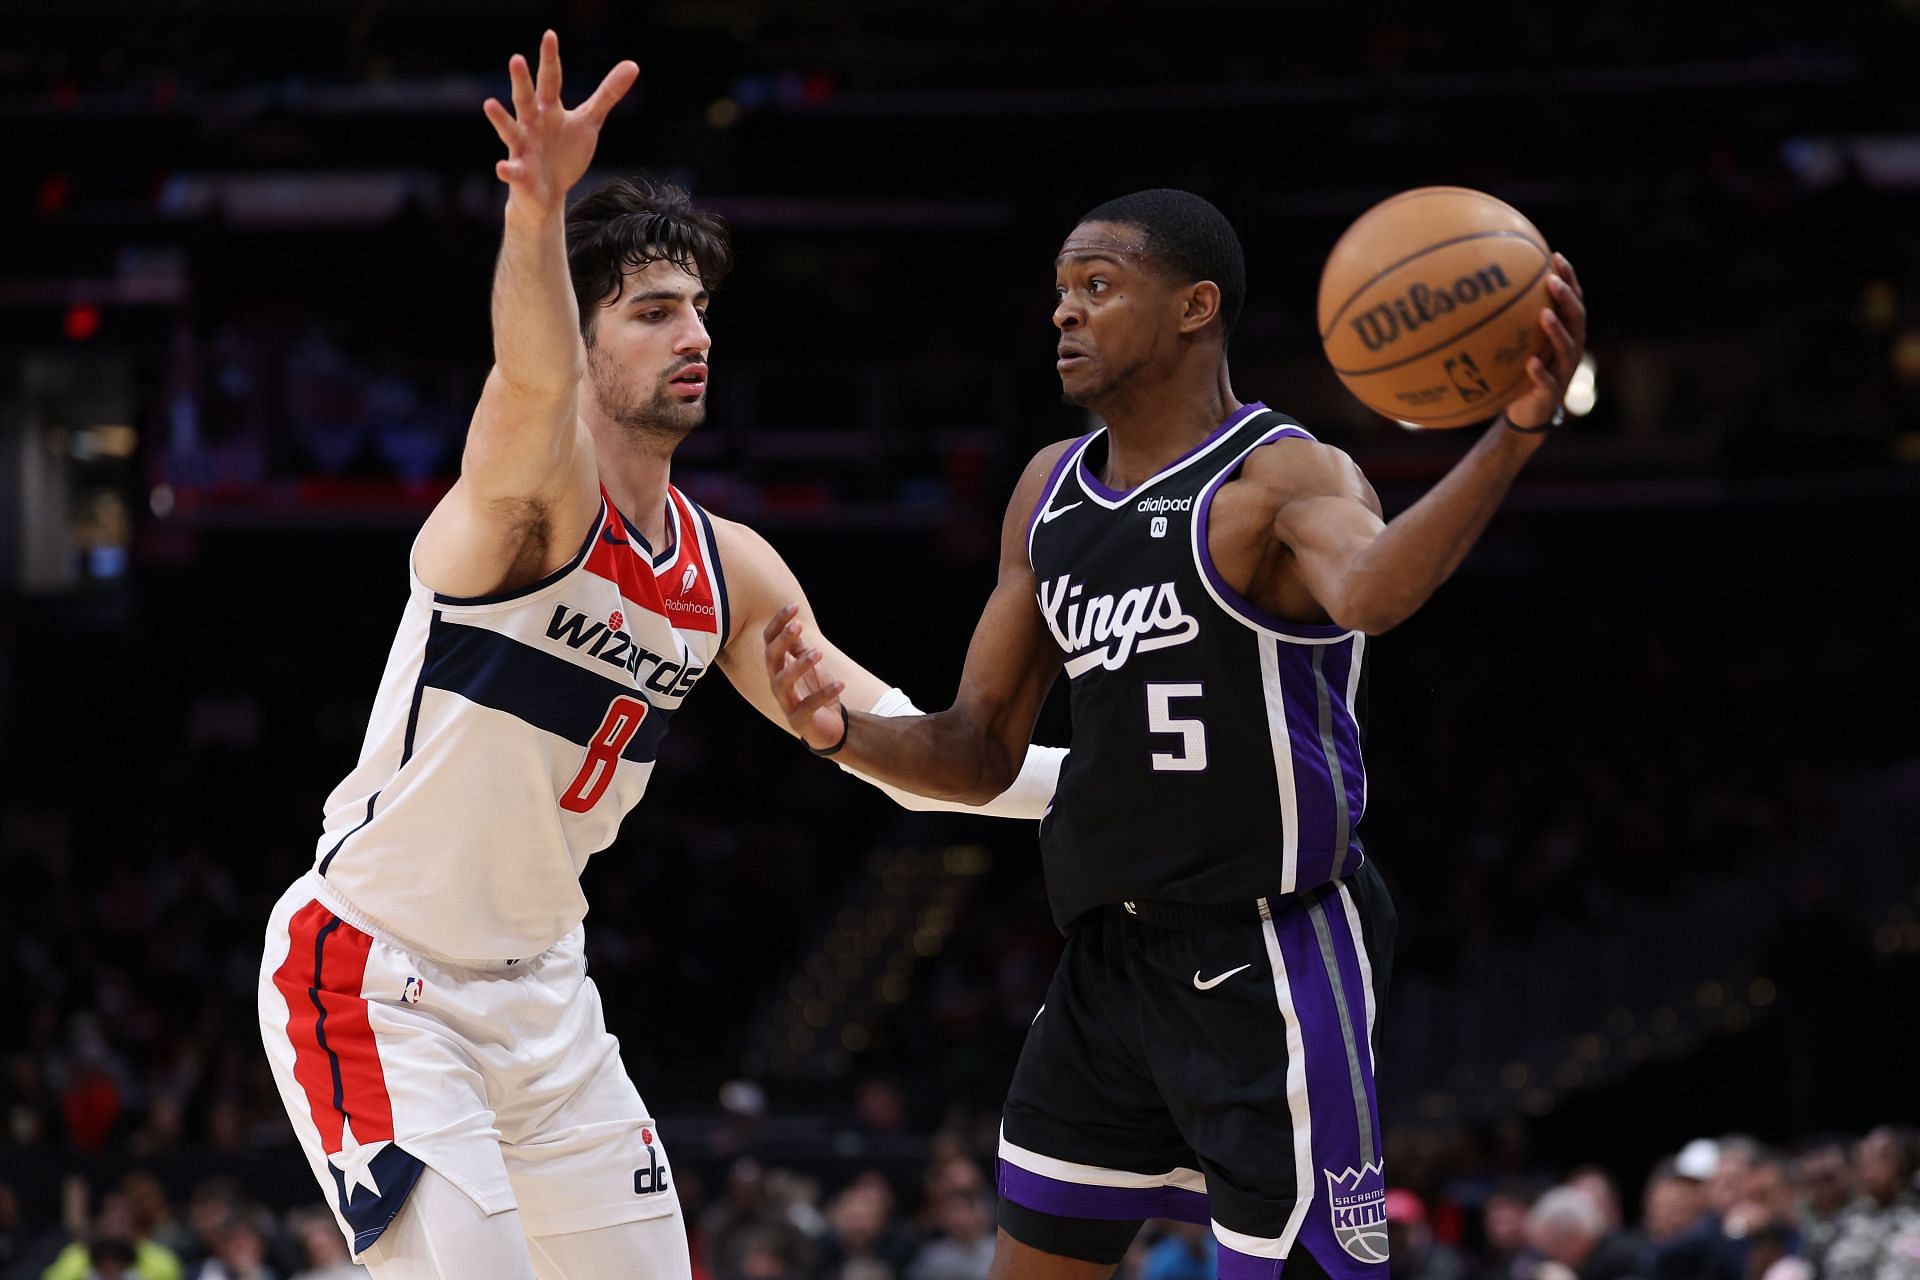 The Washington Wizards, including forward Deni Avdija, are last in the NBA in rebounding. Arizona center Oumar Ballo could help fix that deficiency.